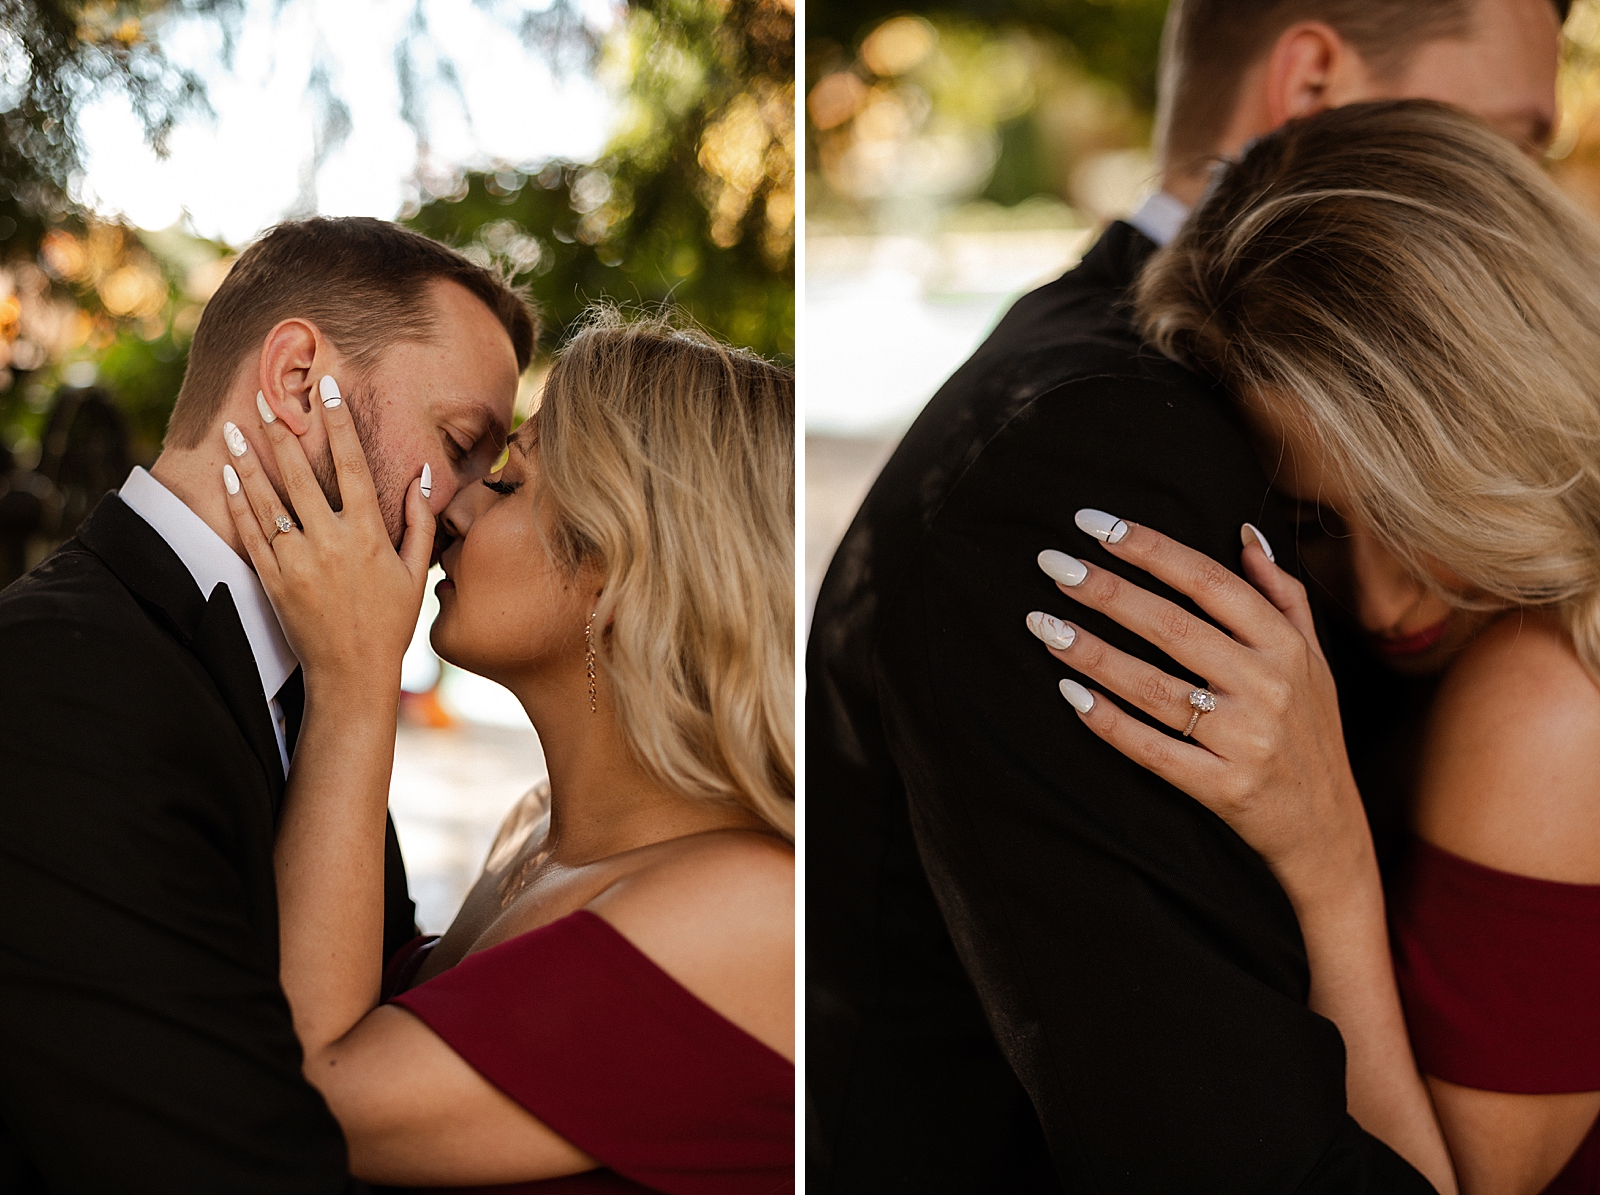 Couple kissing and woman showing off engagement ring